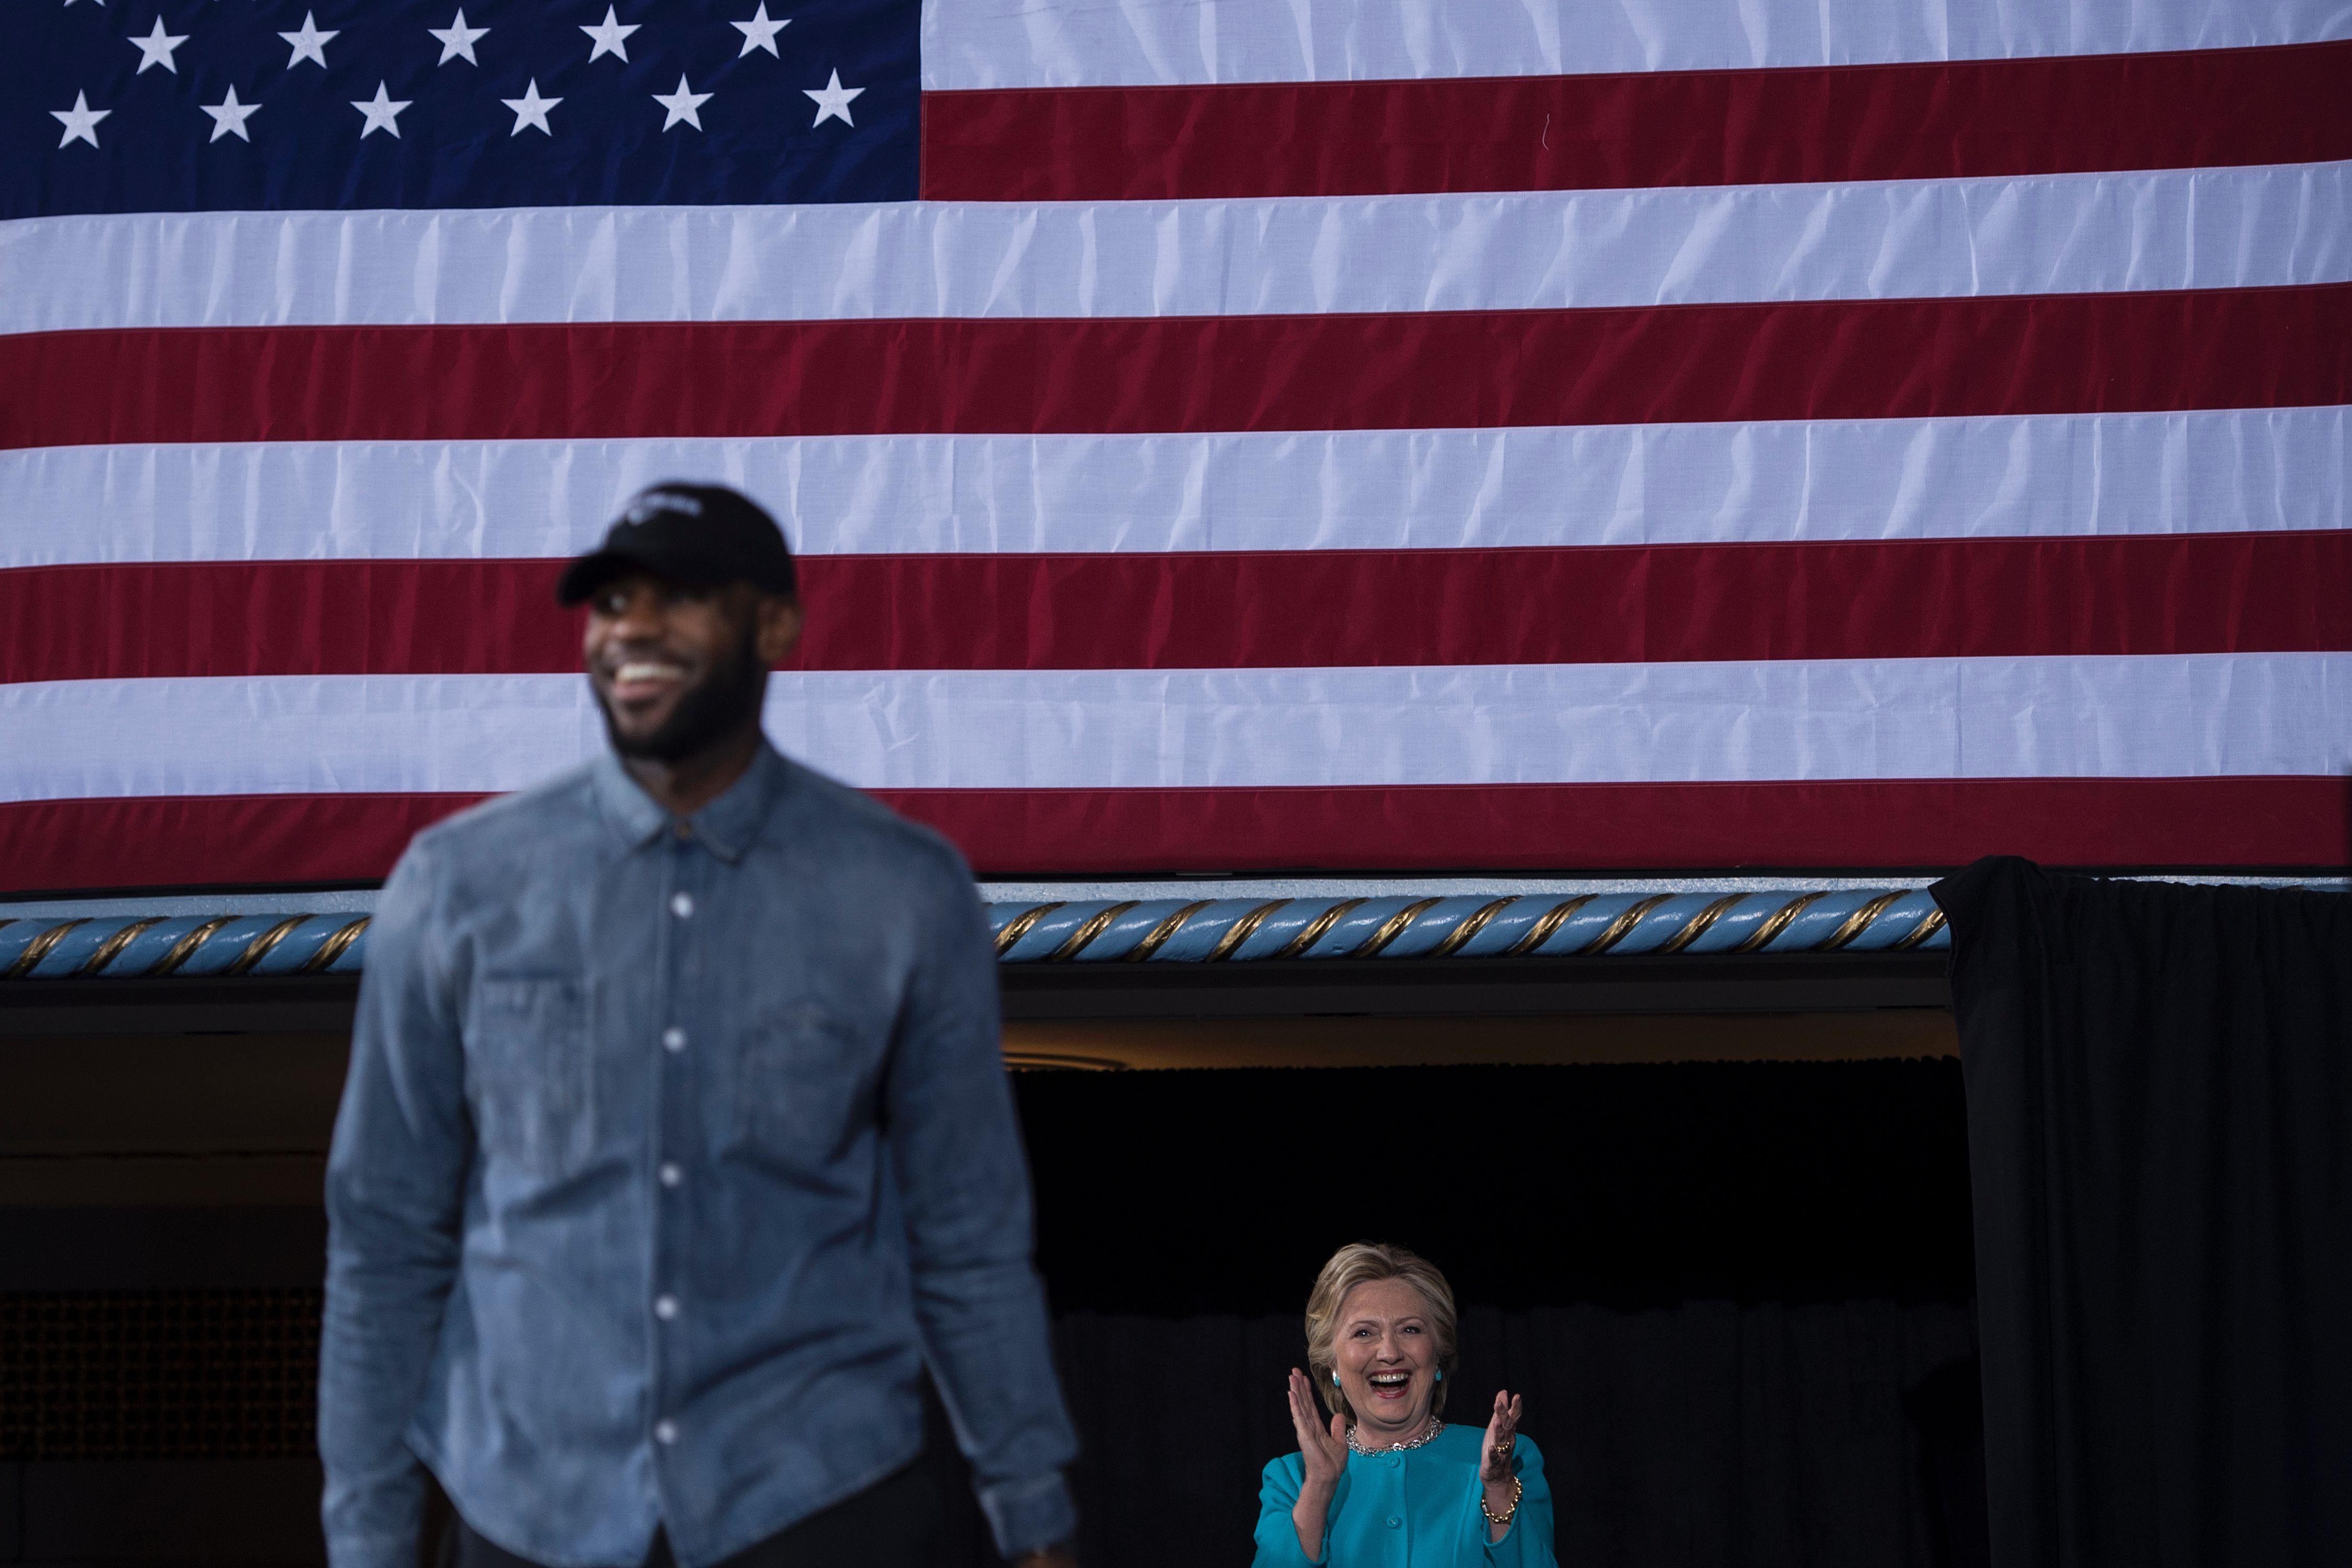 NBA basketball player Lebron James and Hillary Clinton arrive for a rally at the Cleveland Public Auditorium November 6, 2016 in Cleveland, Ohio.